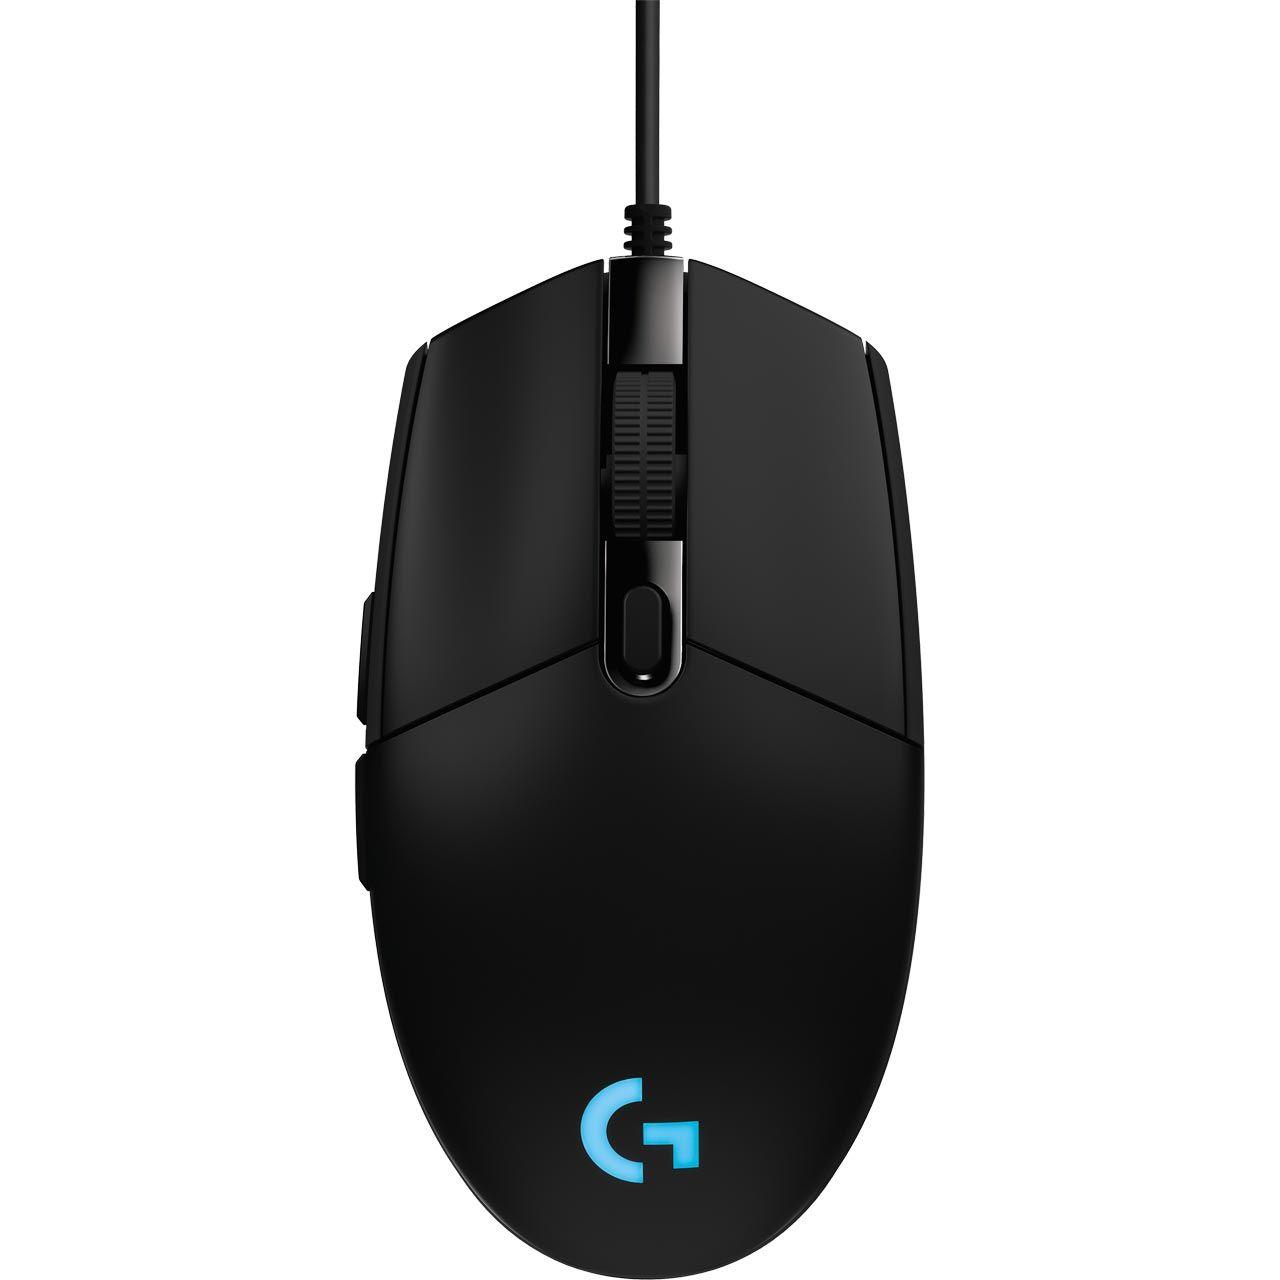 Logitech G203 Prodigy Wired USB Optical Gaming Mouse Review